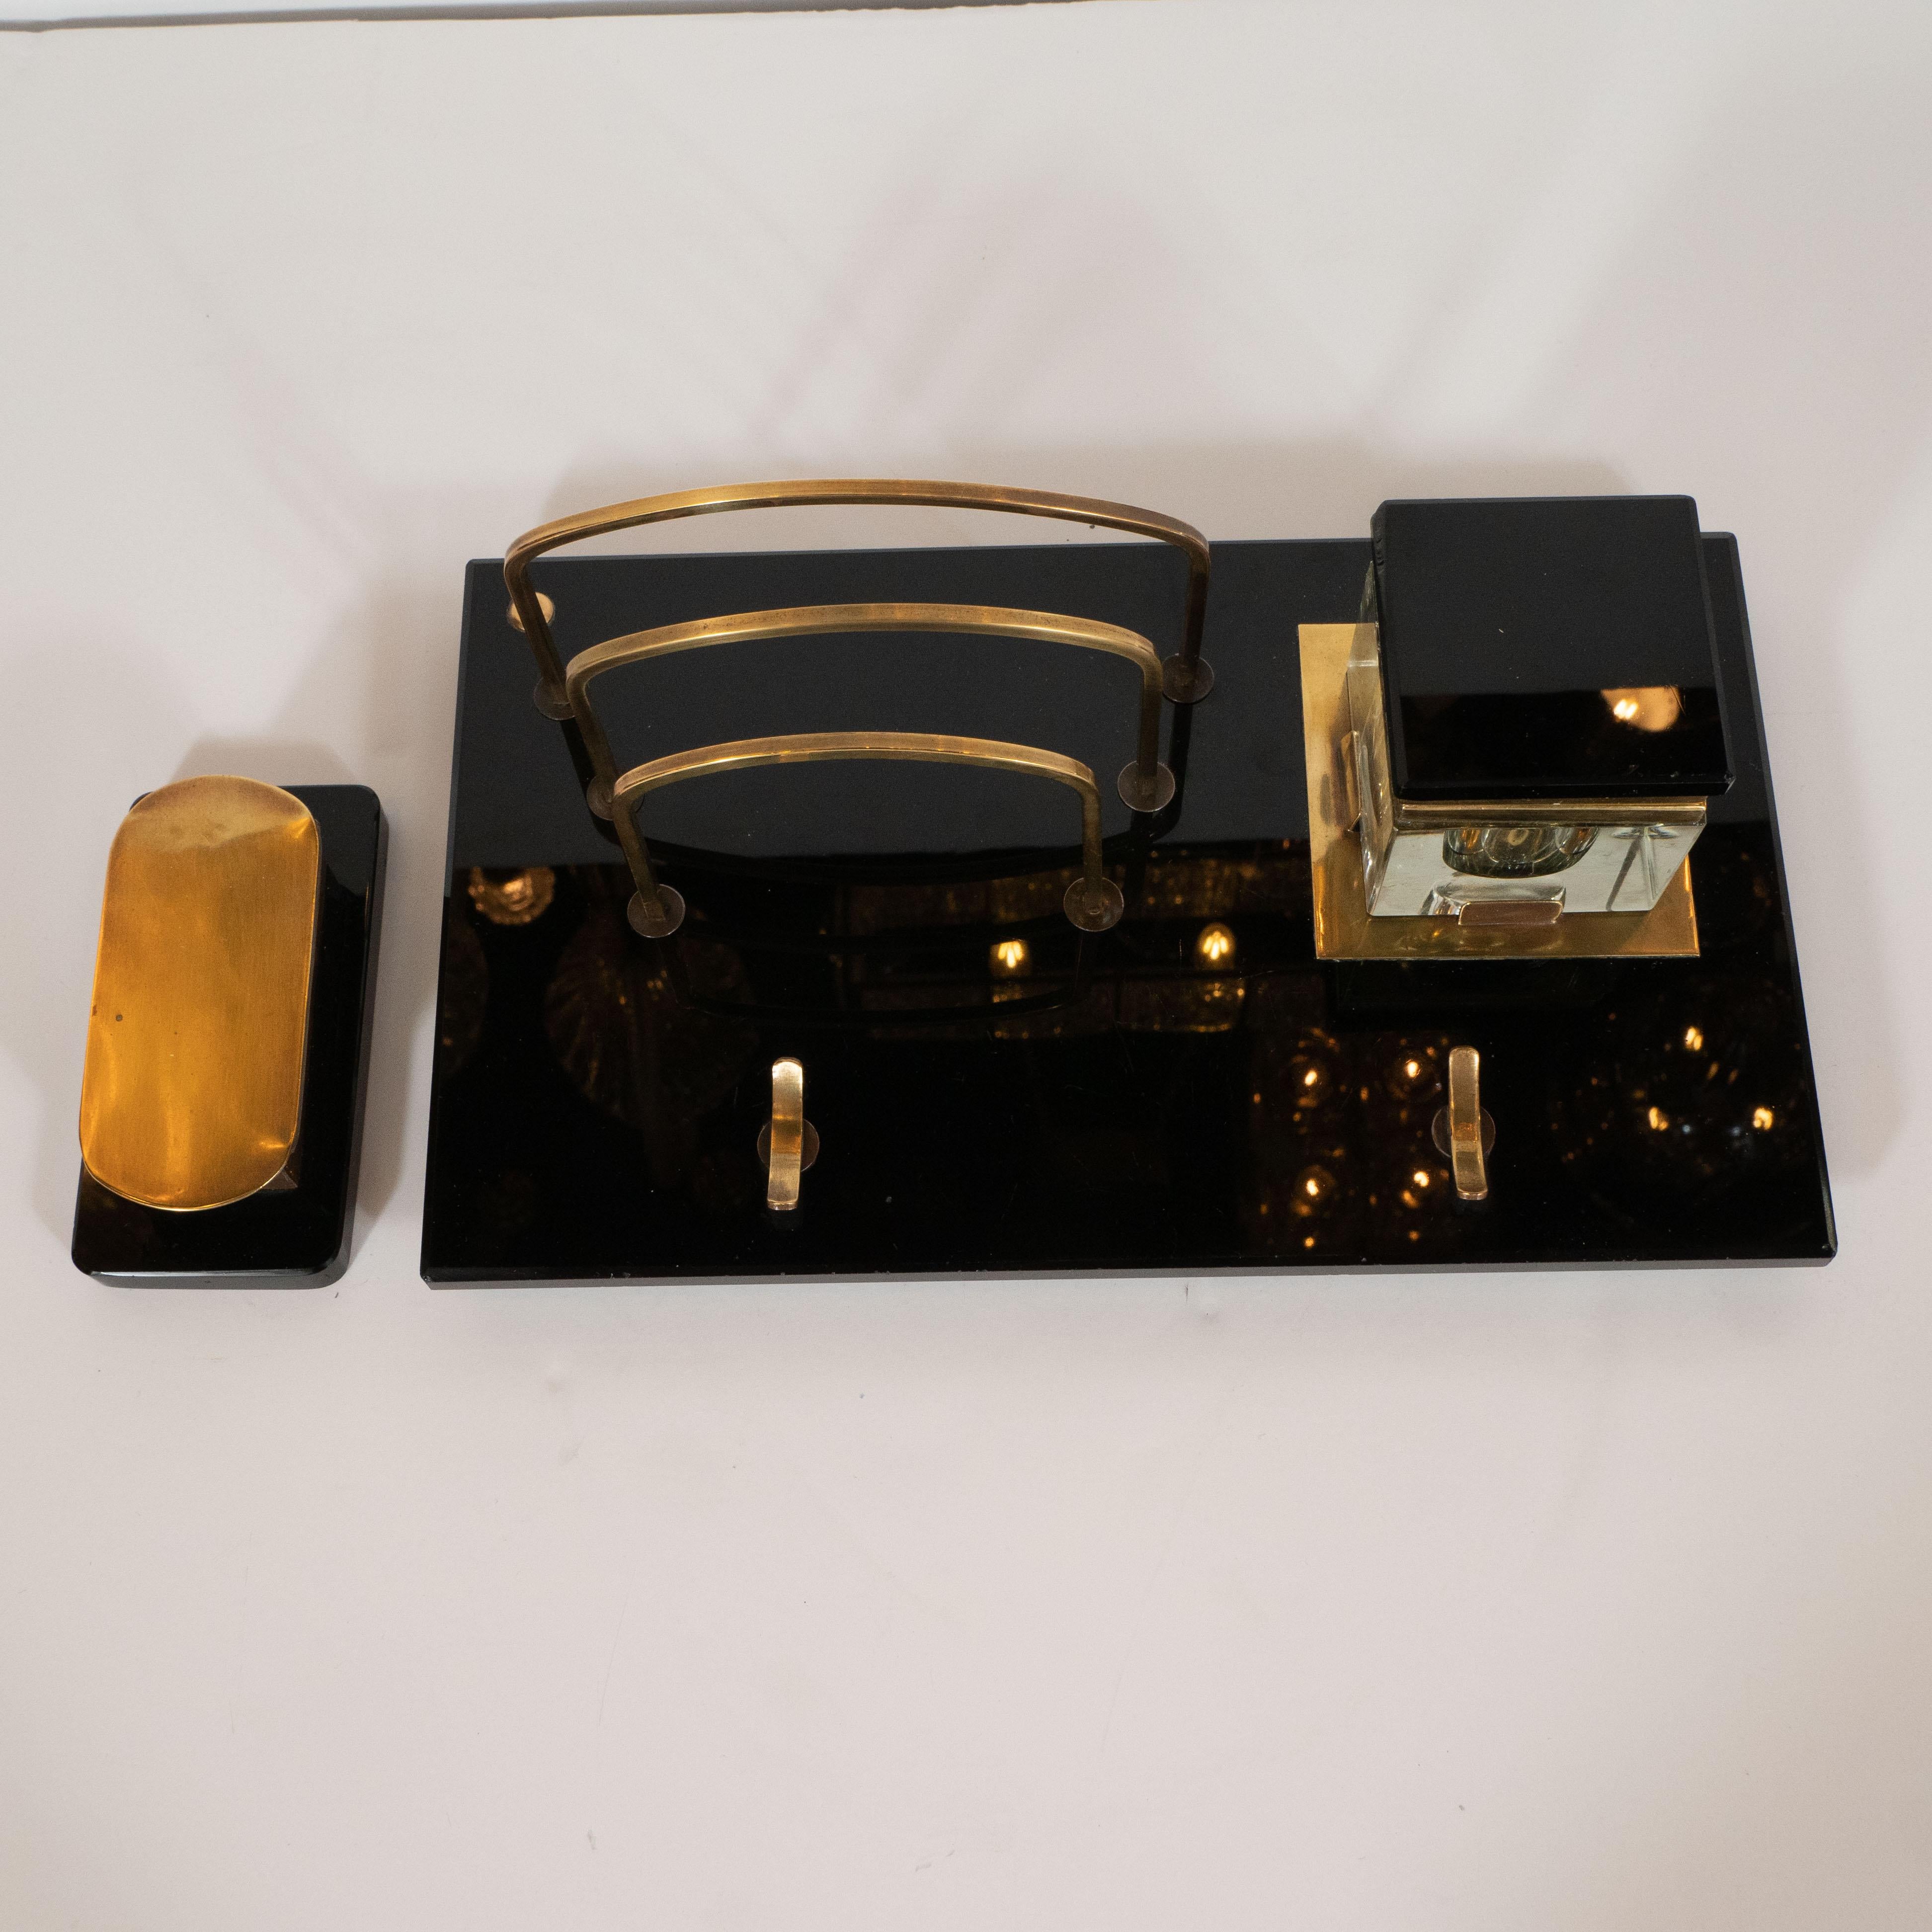 American Art Deco Black Vitrolite and Brass Desk Set with Pen Rest, Inkwell & Stamp Caddy